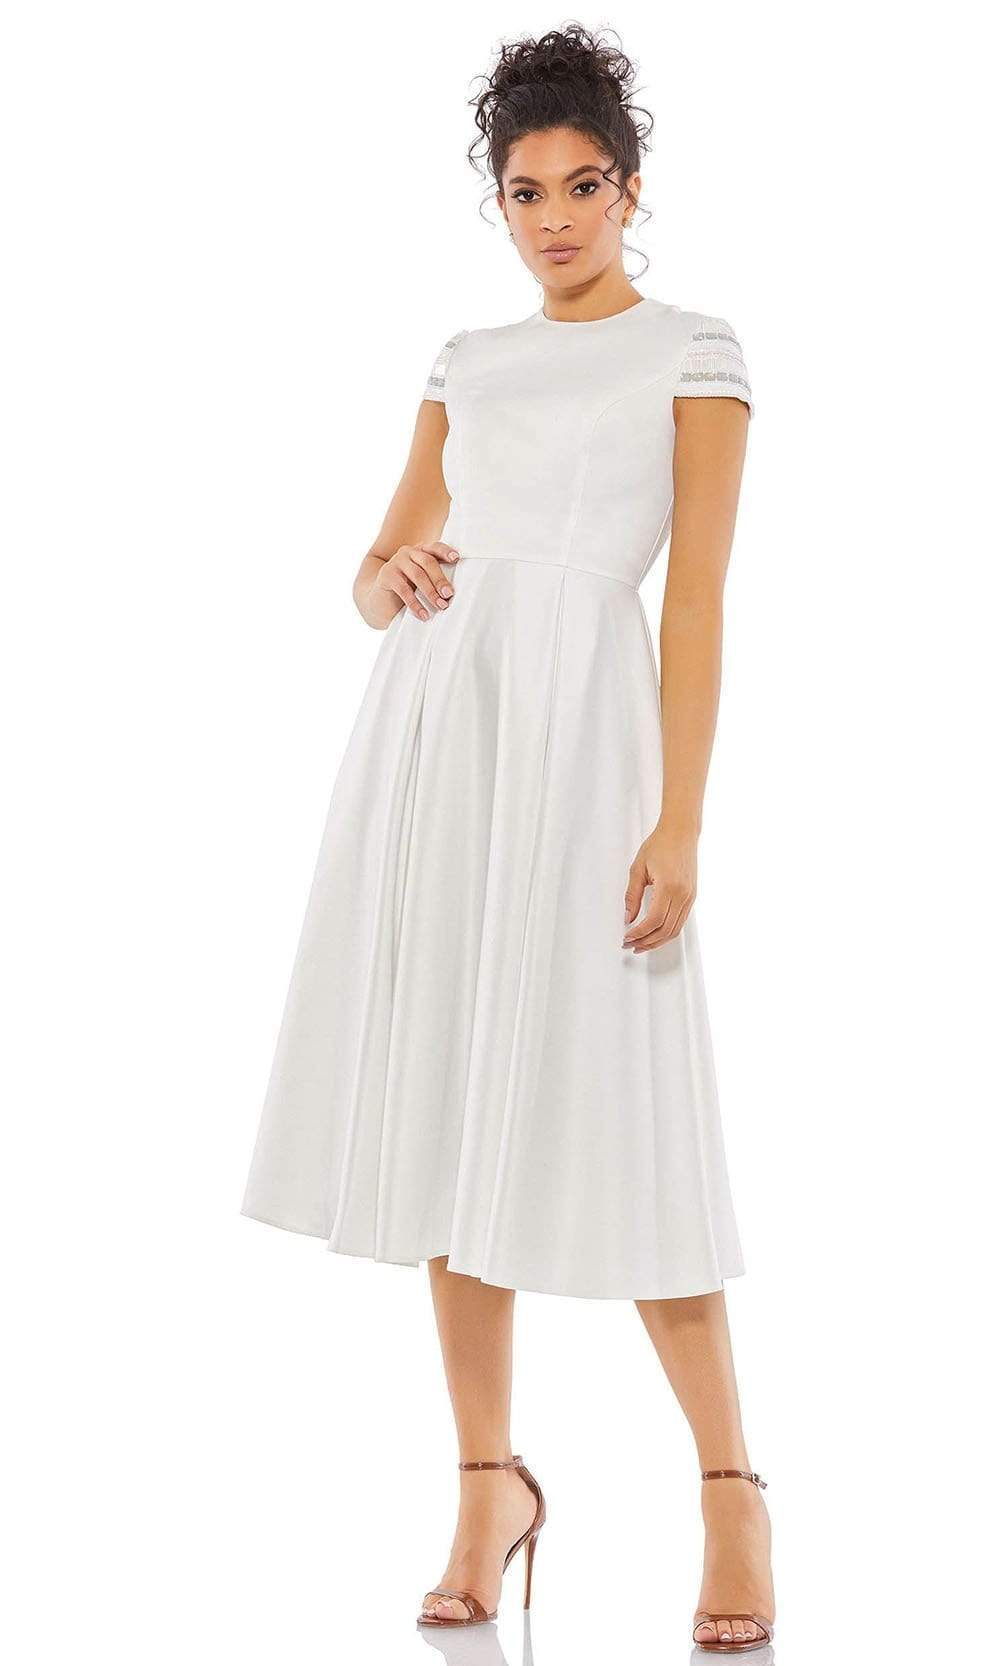 Ieena Duggal - 55699 Jewel Box-Pleated A-Line Dress Mother of the Bride Dresess 0 / White